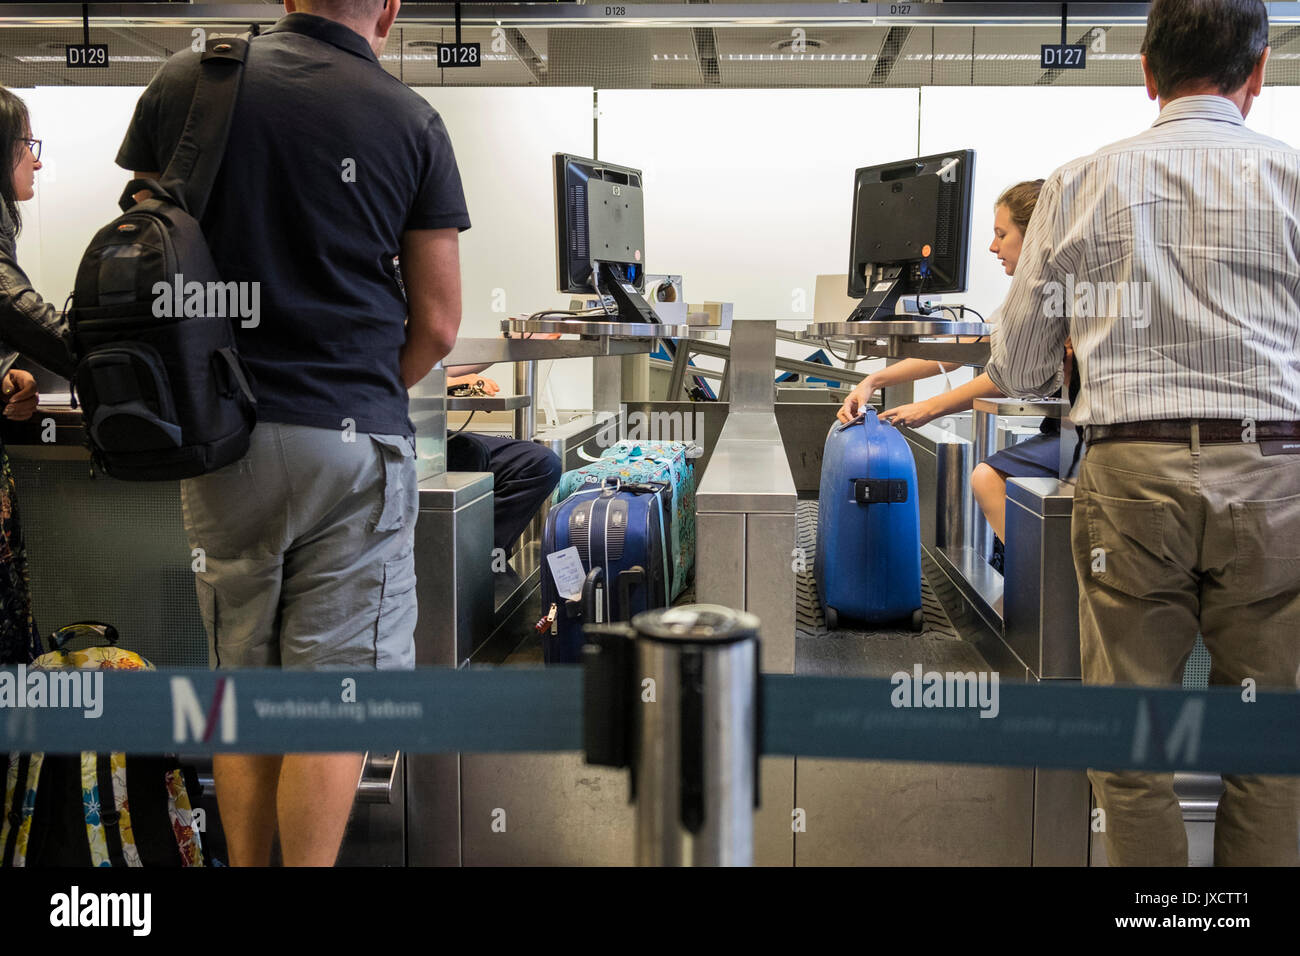 Checking in suitcases at check in desks in Munich airport, Bavaria, Germany Stock Photo